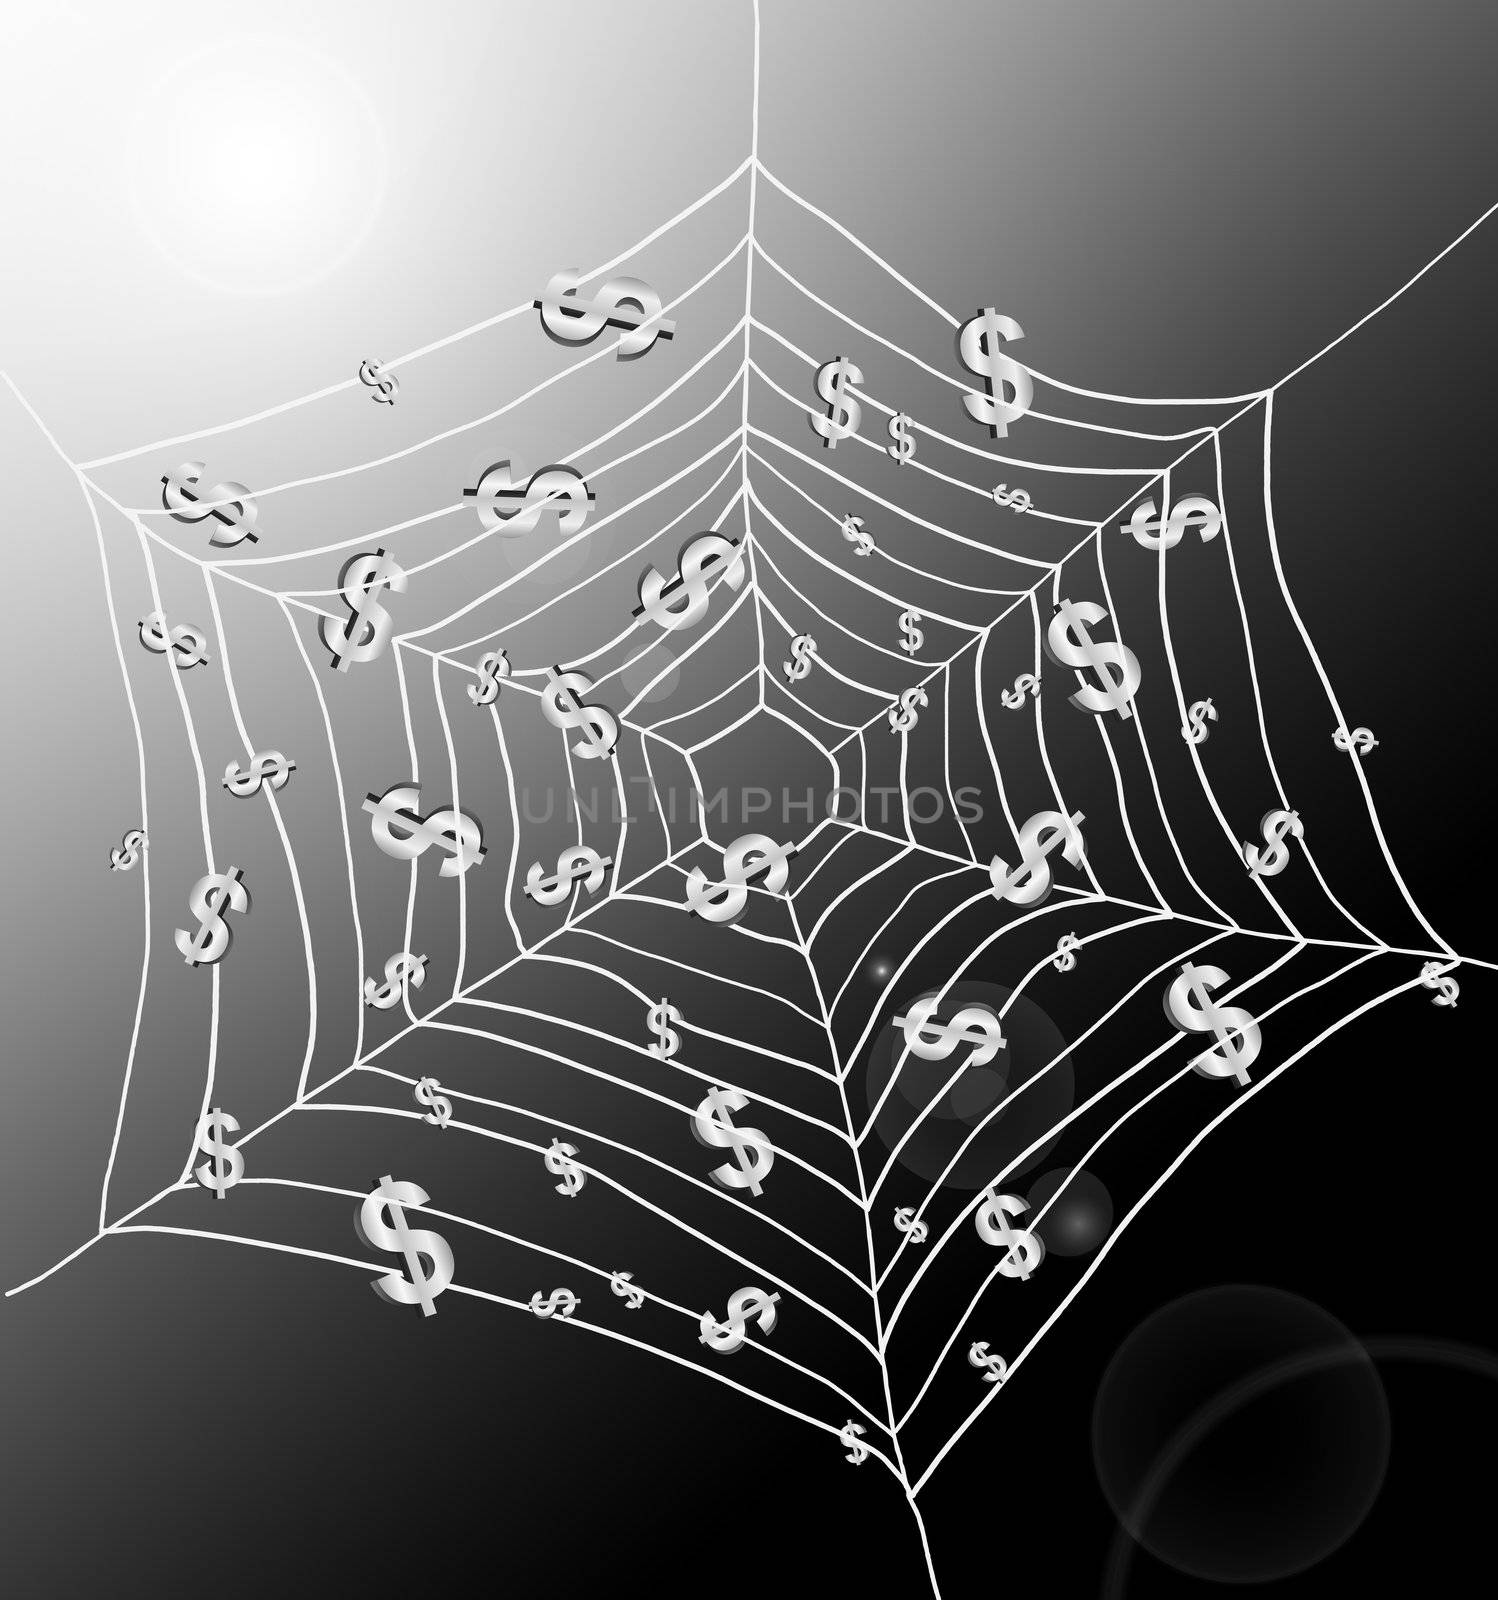 Illustration depicting a spiderweb with Dollar signs trapped by the threads. Dark with strong sunlight background.